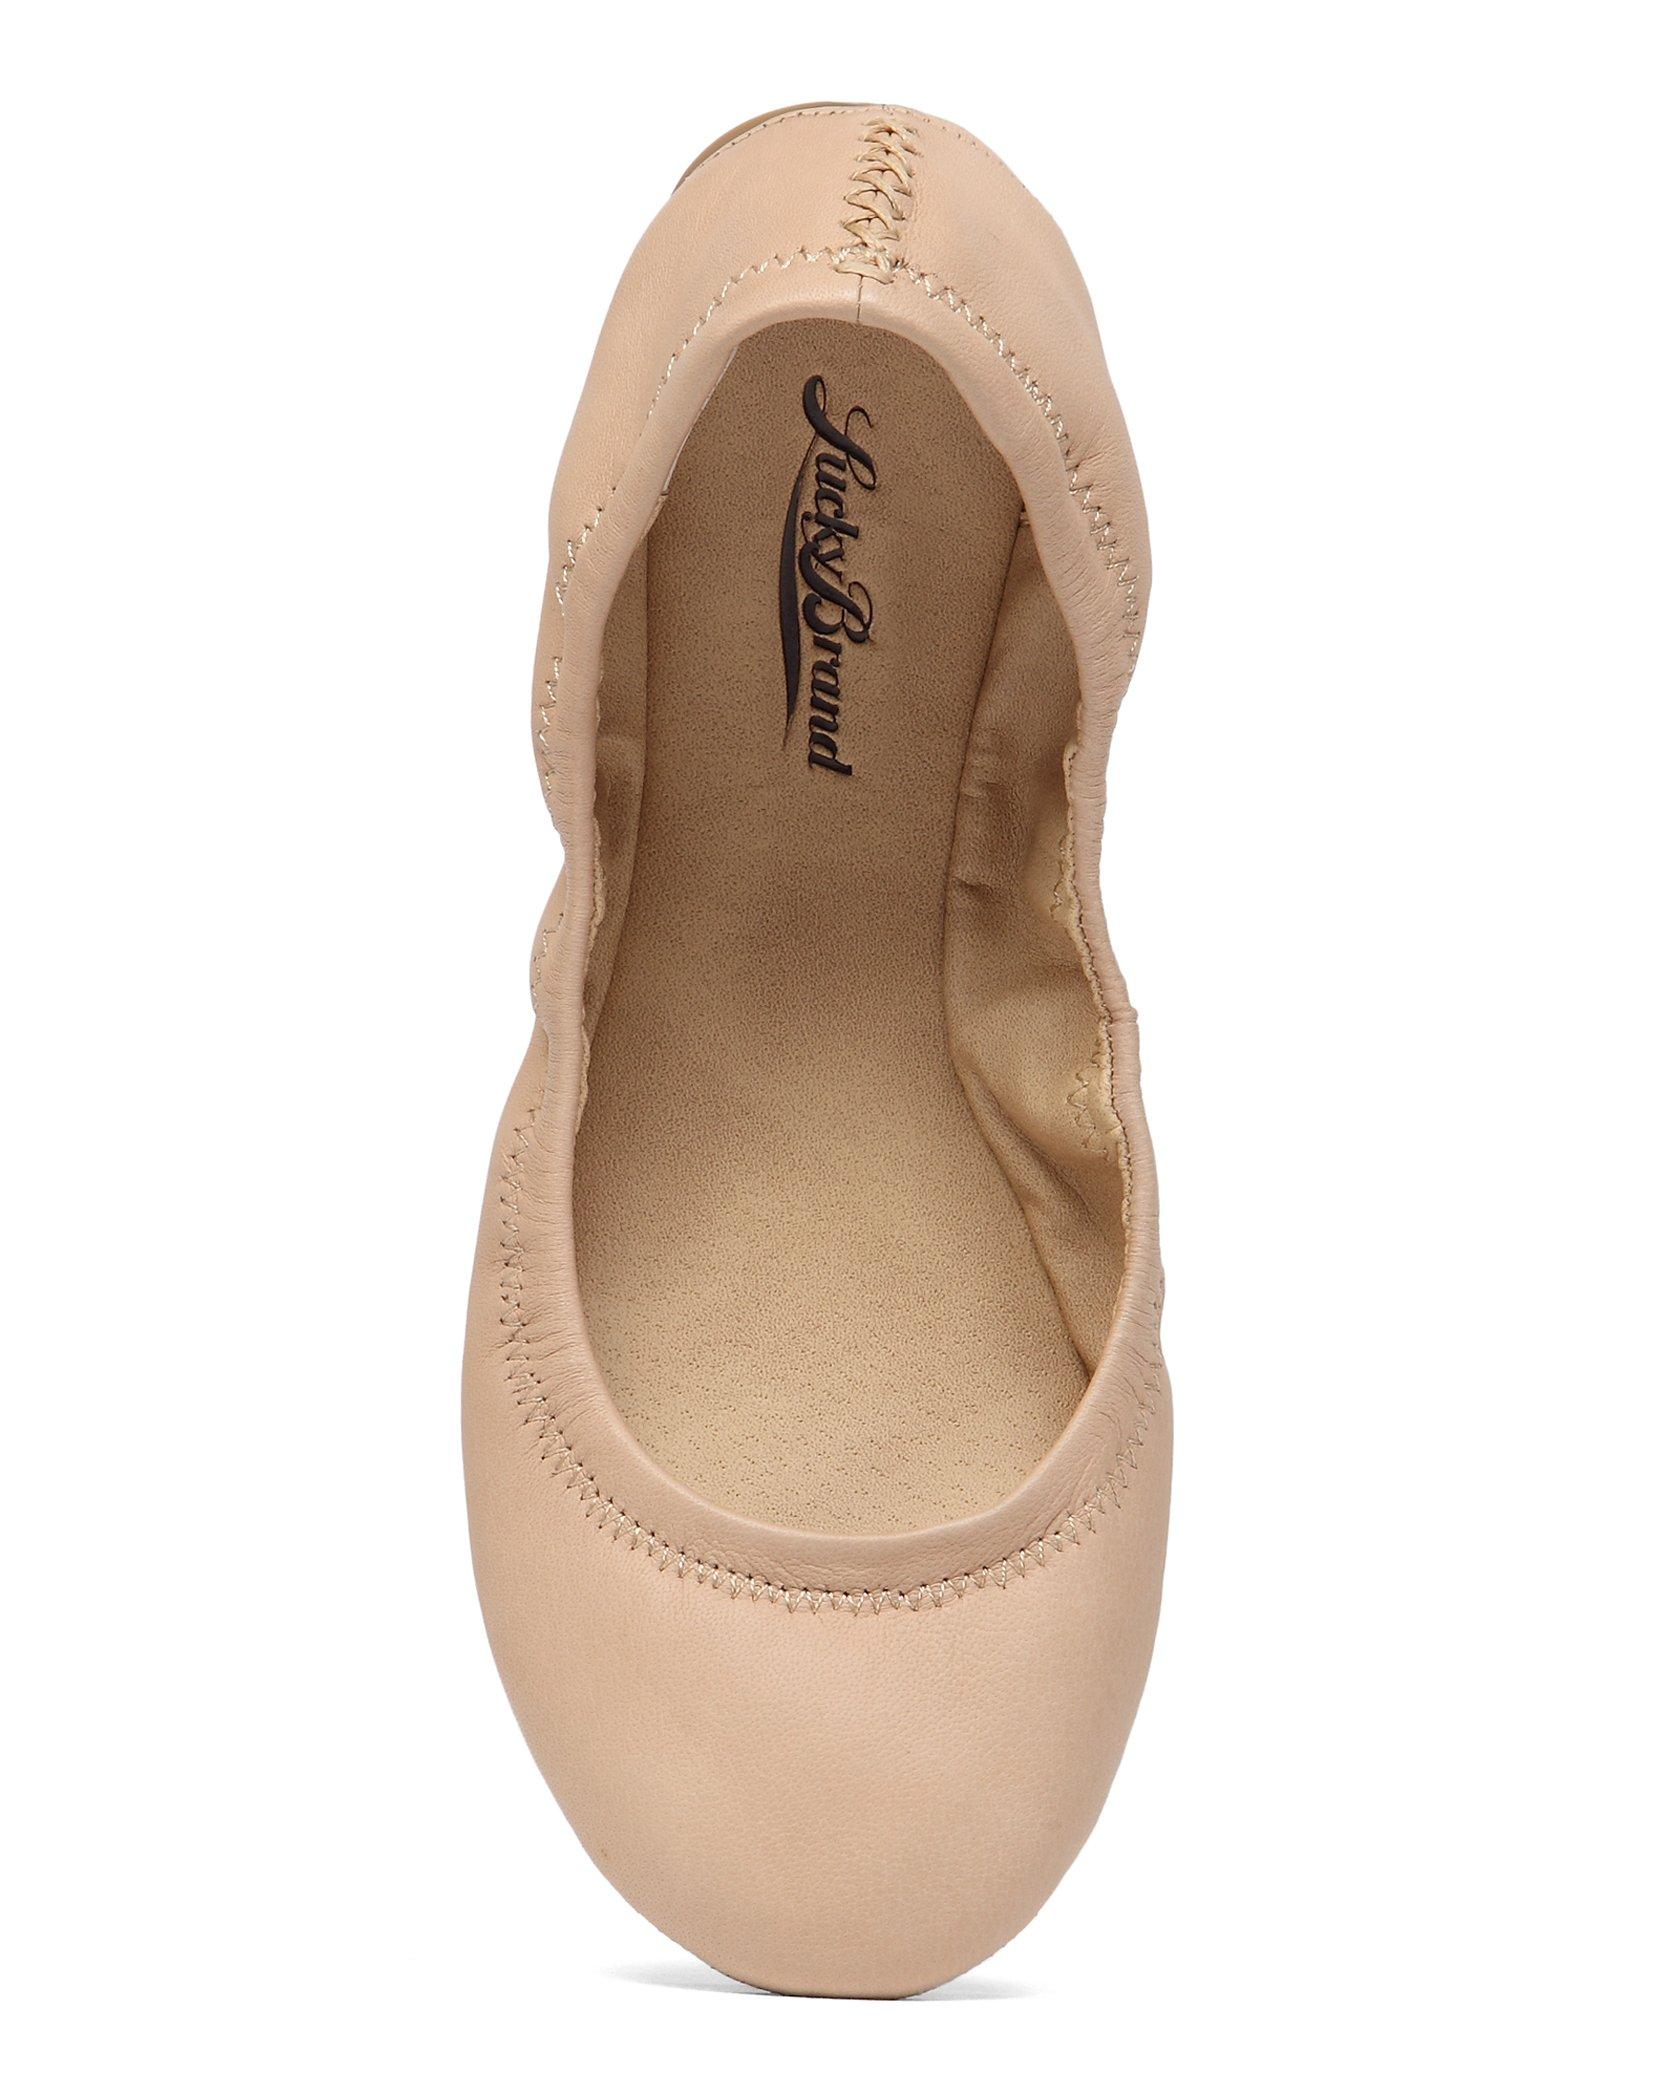 EMMIE LEATHER FLATS, image 6